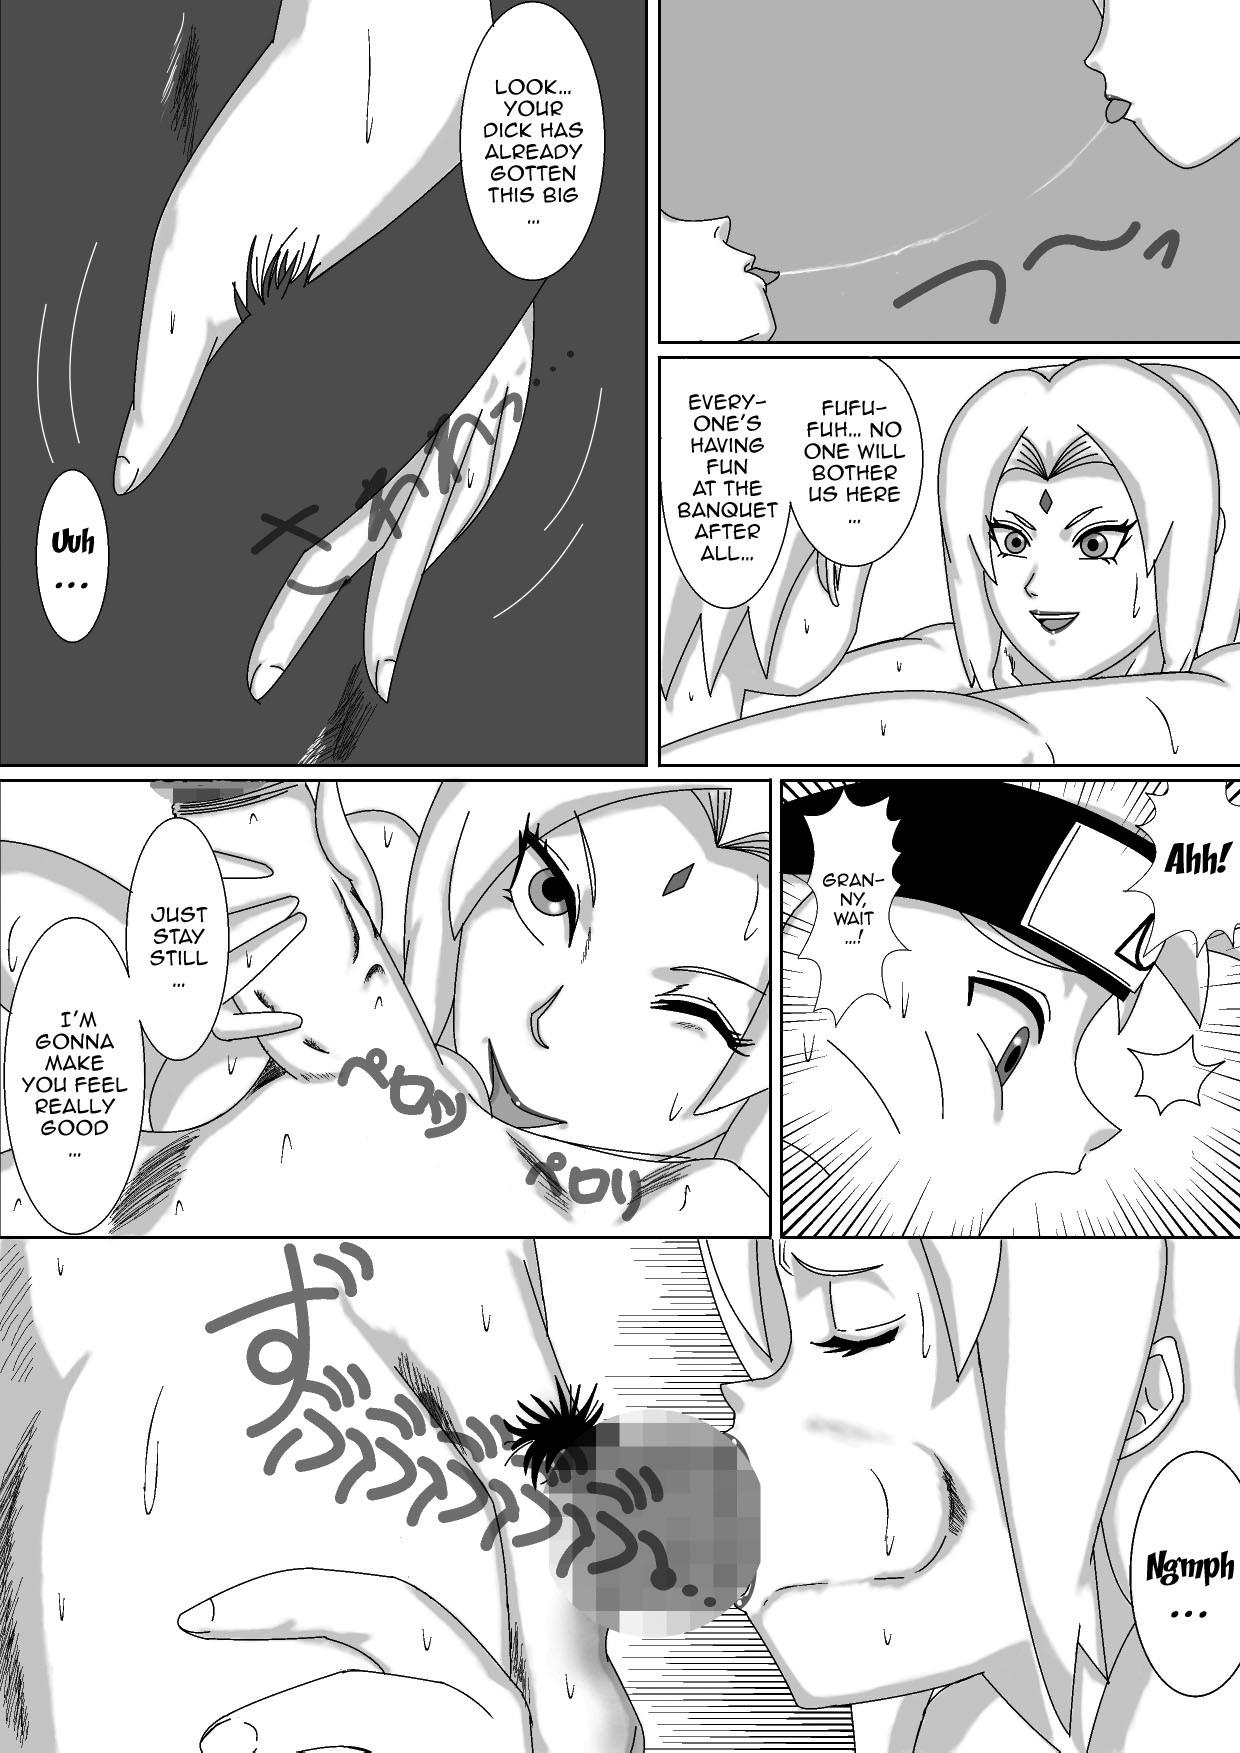 Buttplug Nomisugite Deisui Shita BBA to Yarimakutta Ken!! | The Case Of Having Sex With This Old Lady After She Got Herself Really Drunk - Naruto Work - Page 7